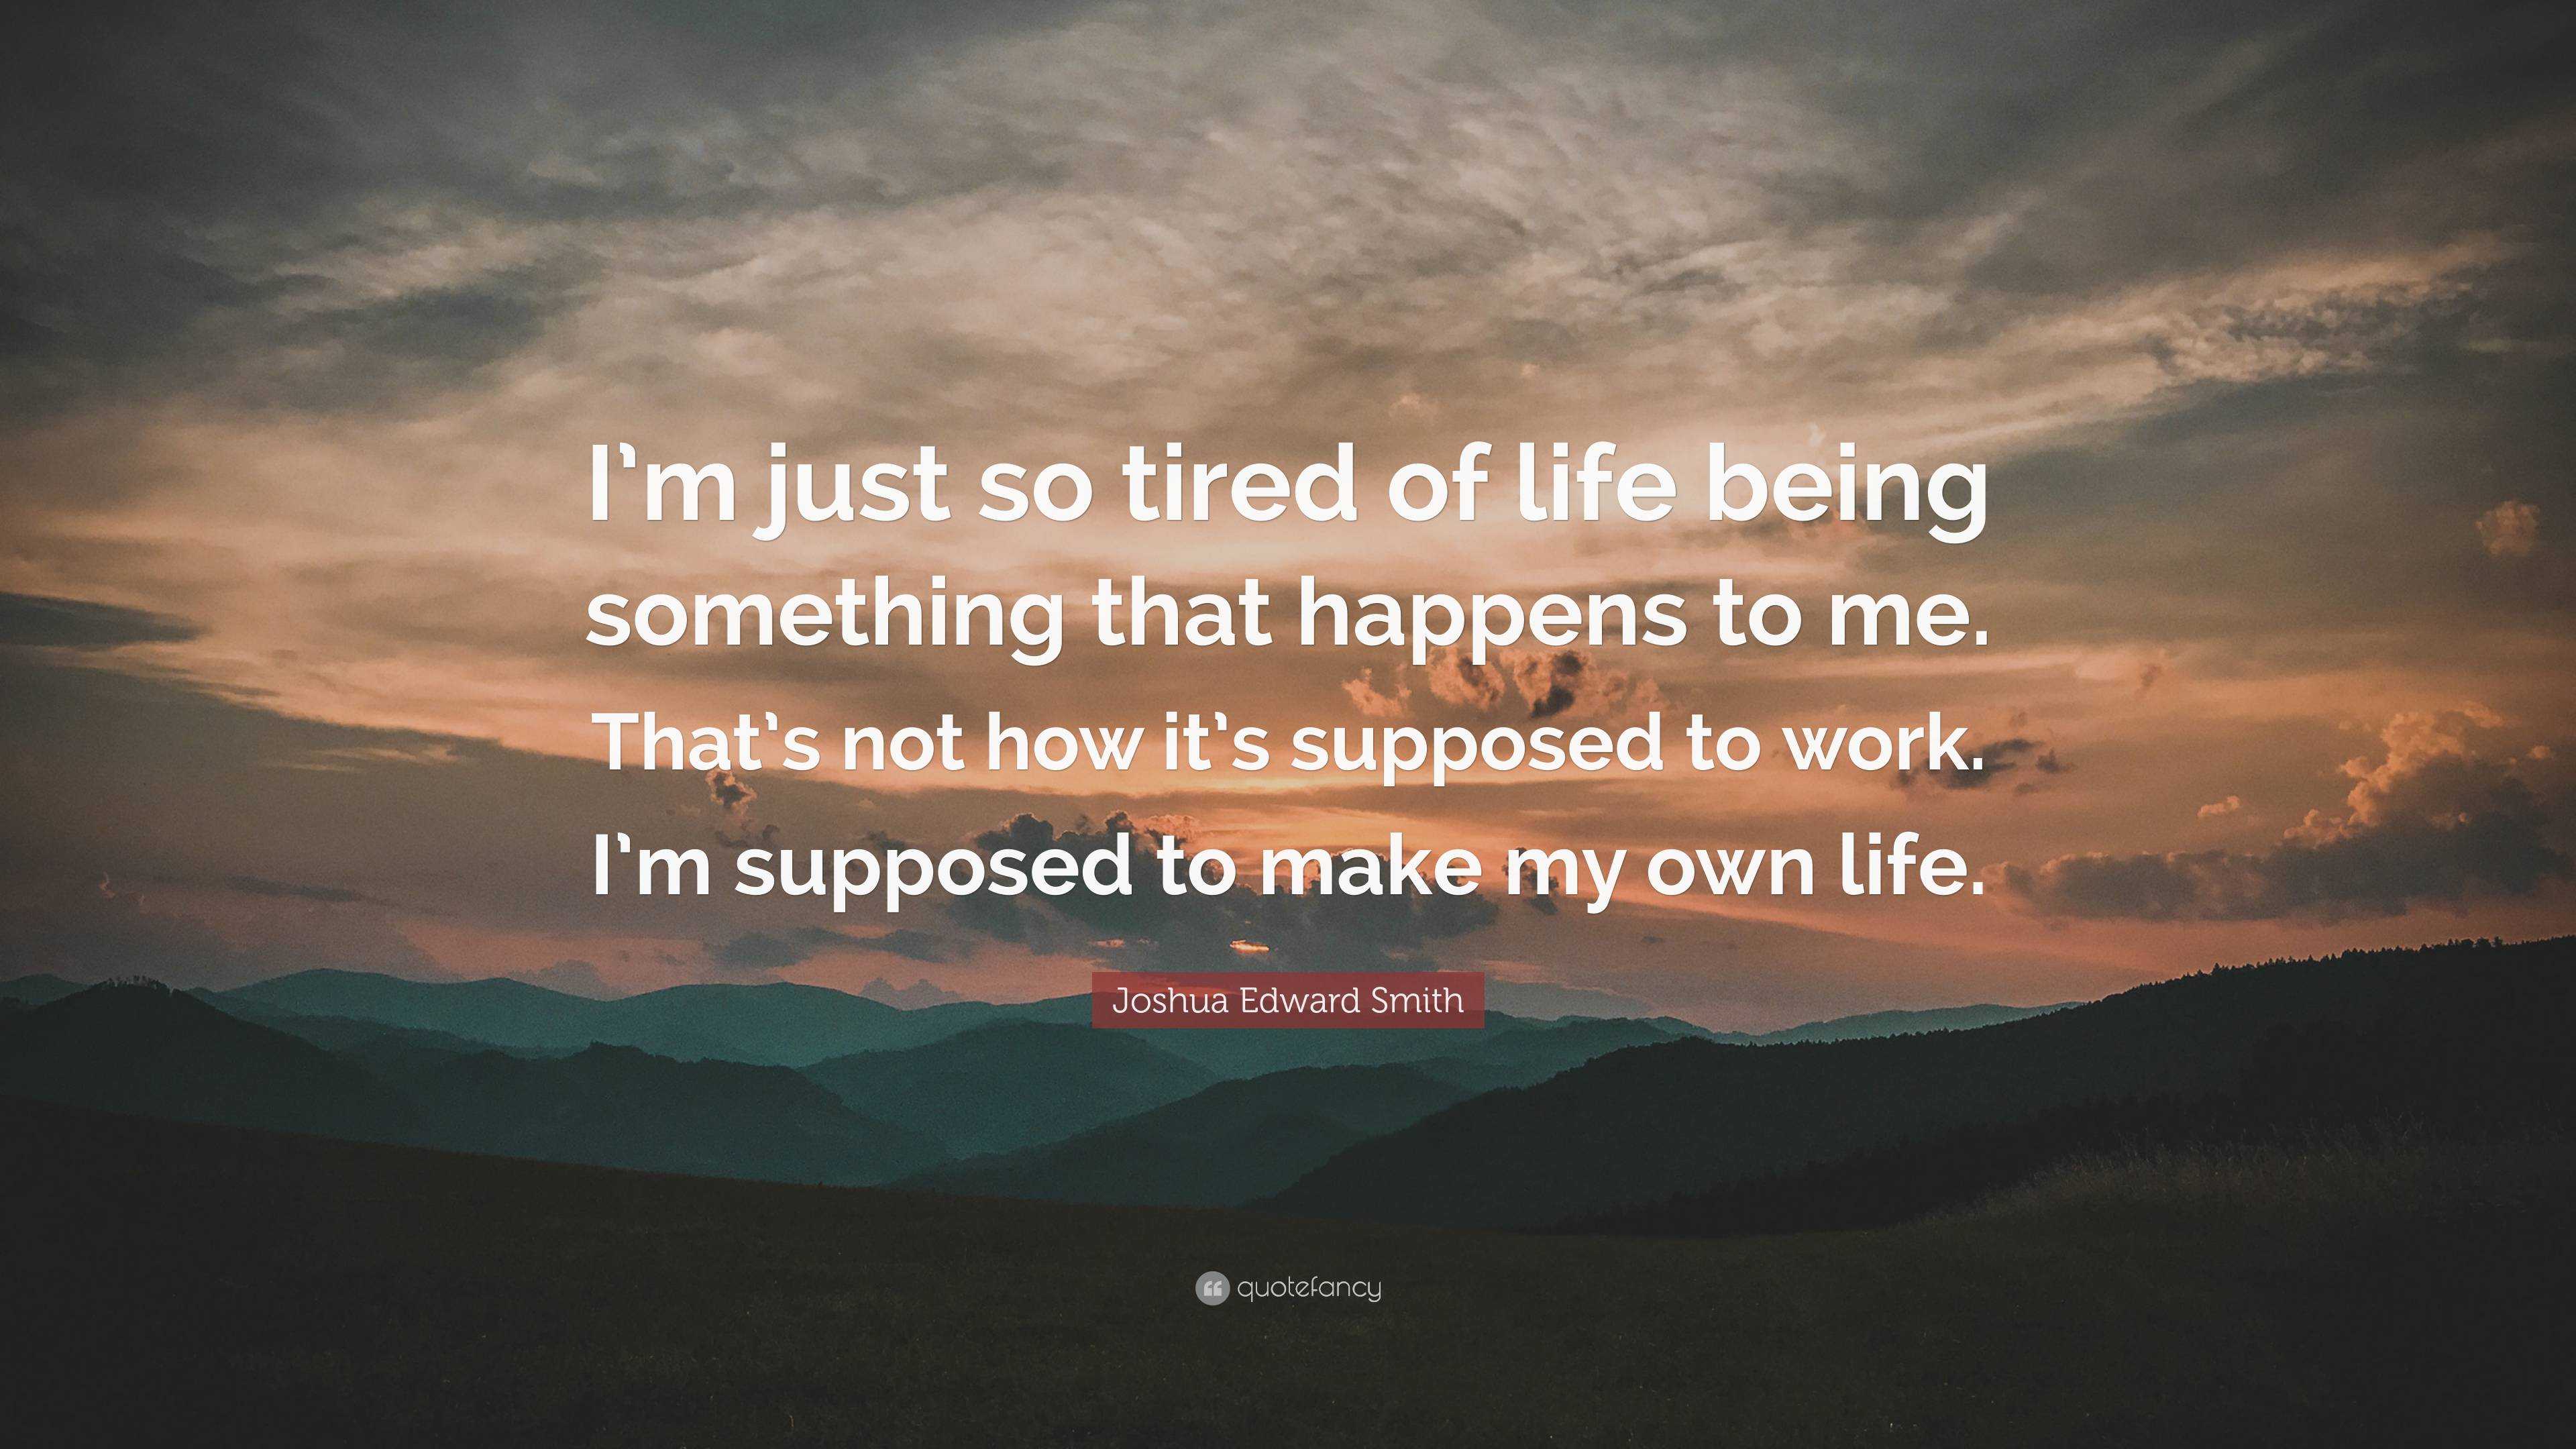 That s Not How It s Done Joshua Edward Smith Quote: “I'm just so tired of life being something that  happens to me. That's not how it's supposed to work. I'm supposed to  make...”